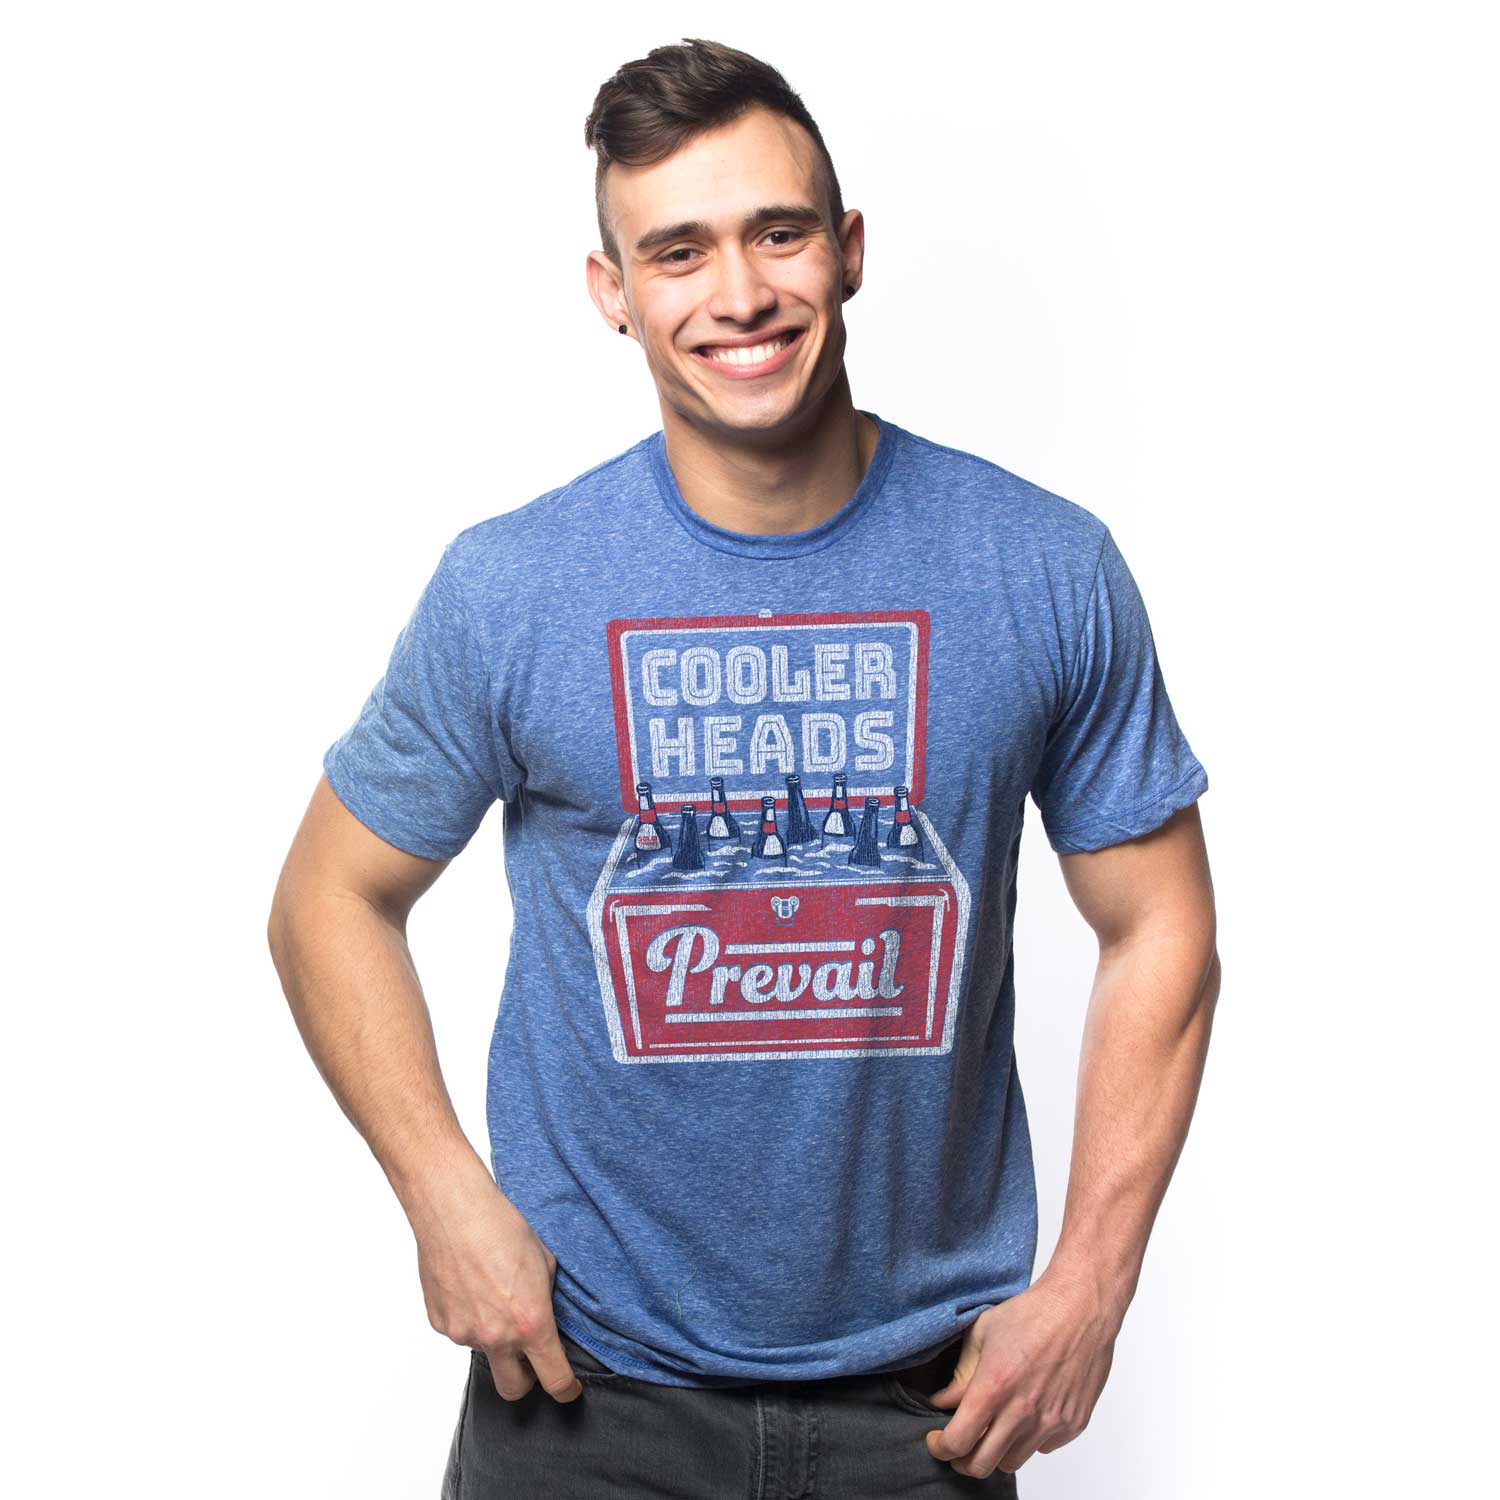 Men's Cooler Heads Prevail Vintage Graphic Tee | Retro Drinking T-shirt | Solid Threads